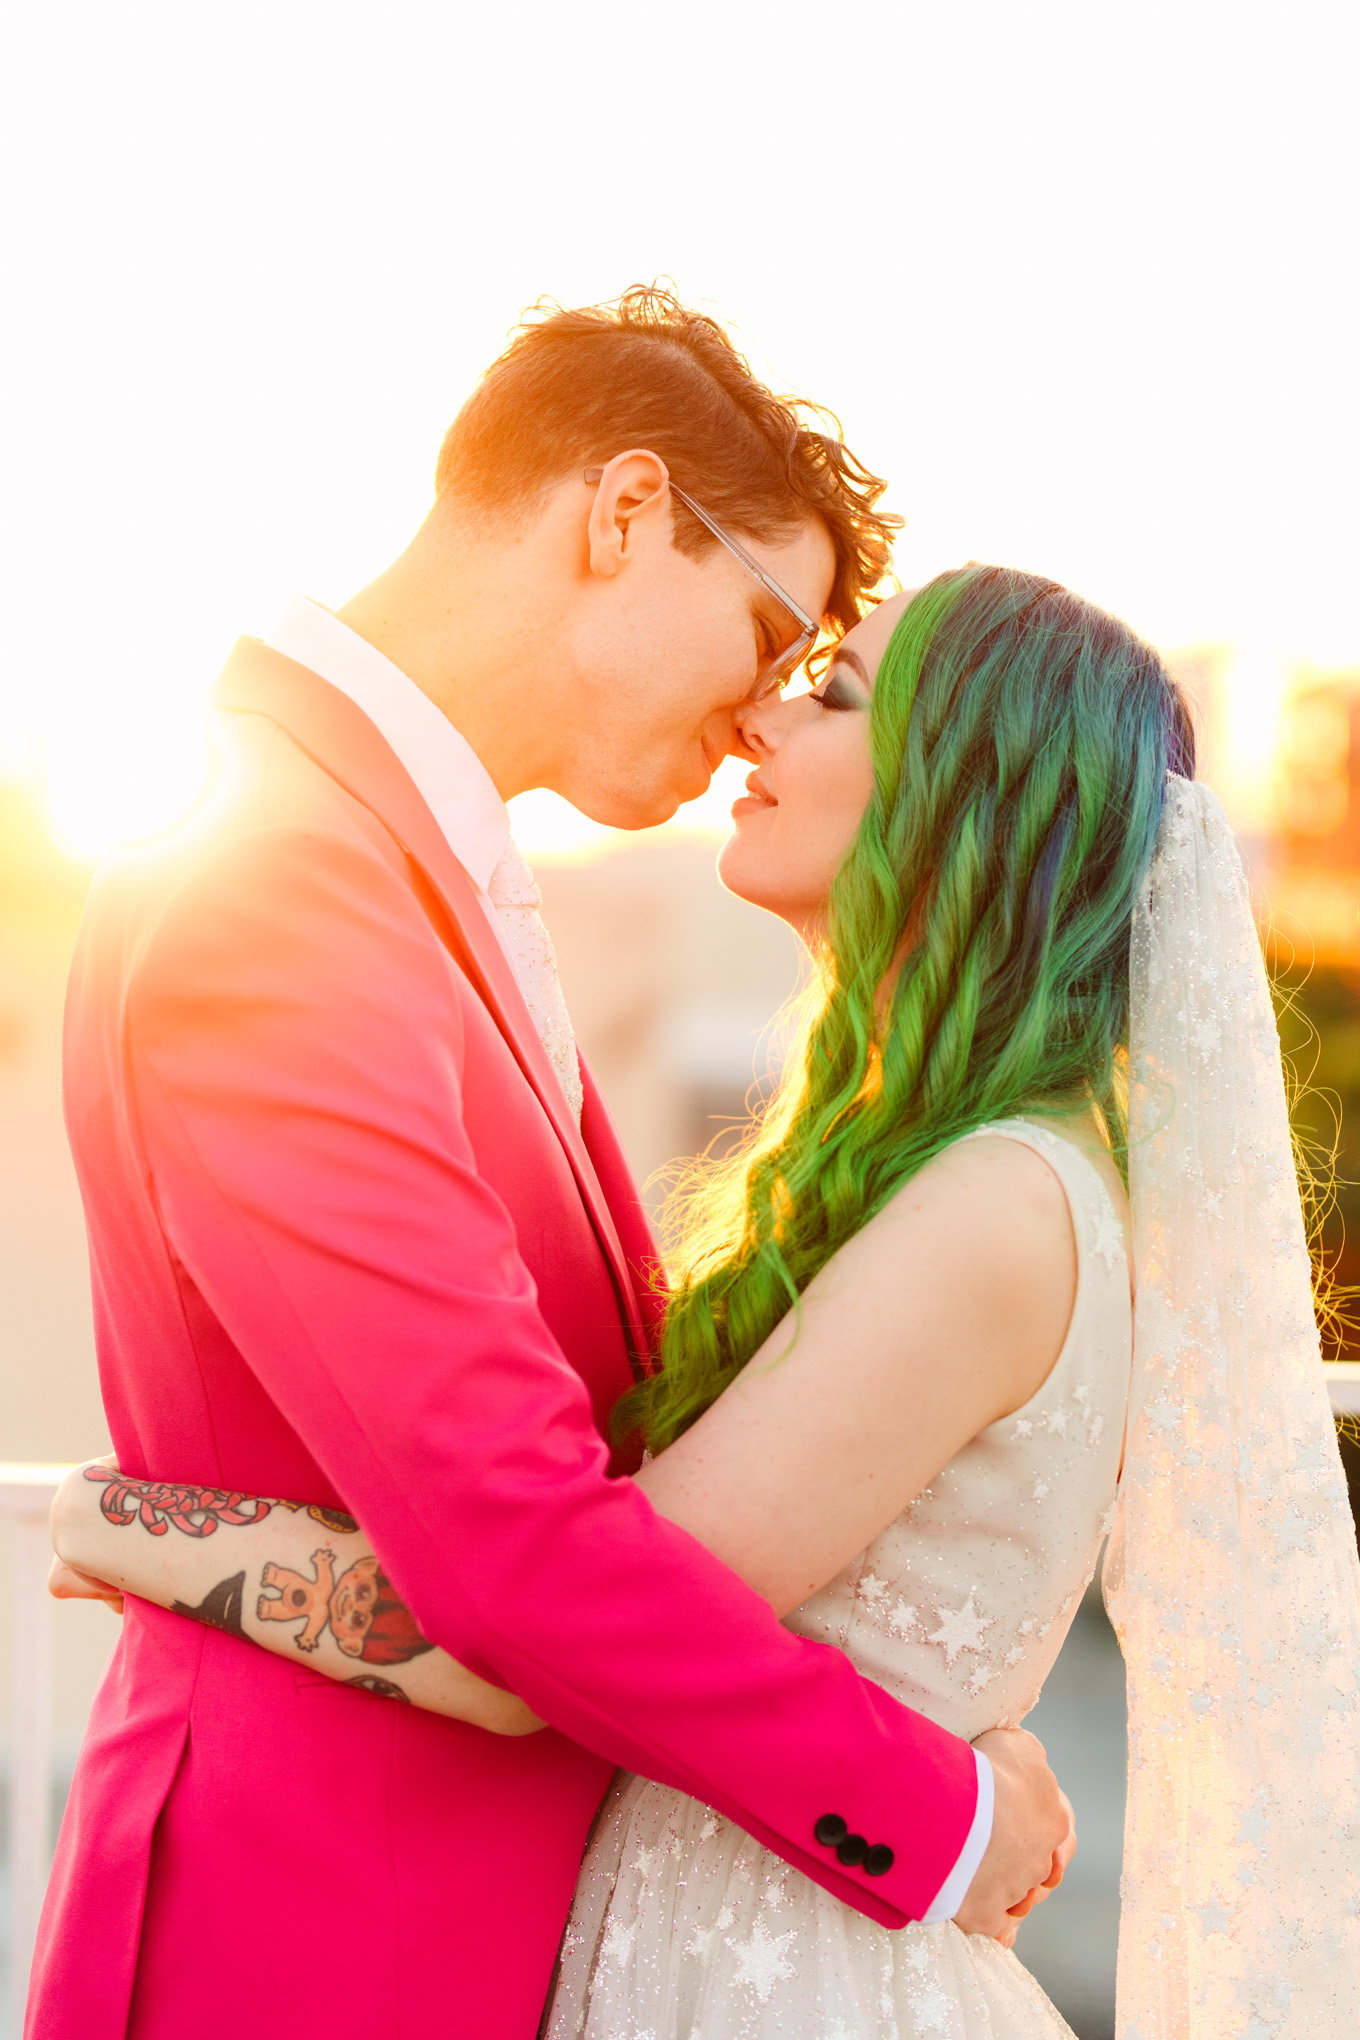 Sunset portraits on rooftop with green hair bride in star gown and groom in hot pink suit | Colorful wedding at The Unique Space Los Angeles published in The Knot Magazine | Fresh and colorful photography for fun-loving couples in Southern California | #colorfulwedding #losangeleswedding #weddingphotography #uniquespace Source: Mary Costa Photography | Los Angeles